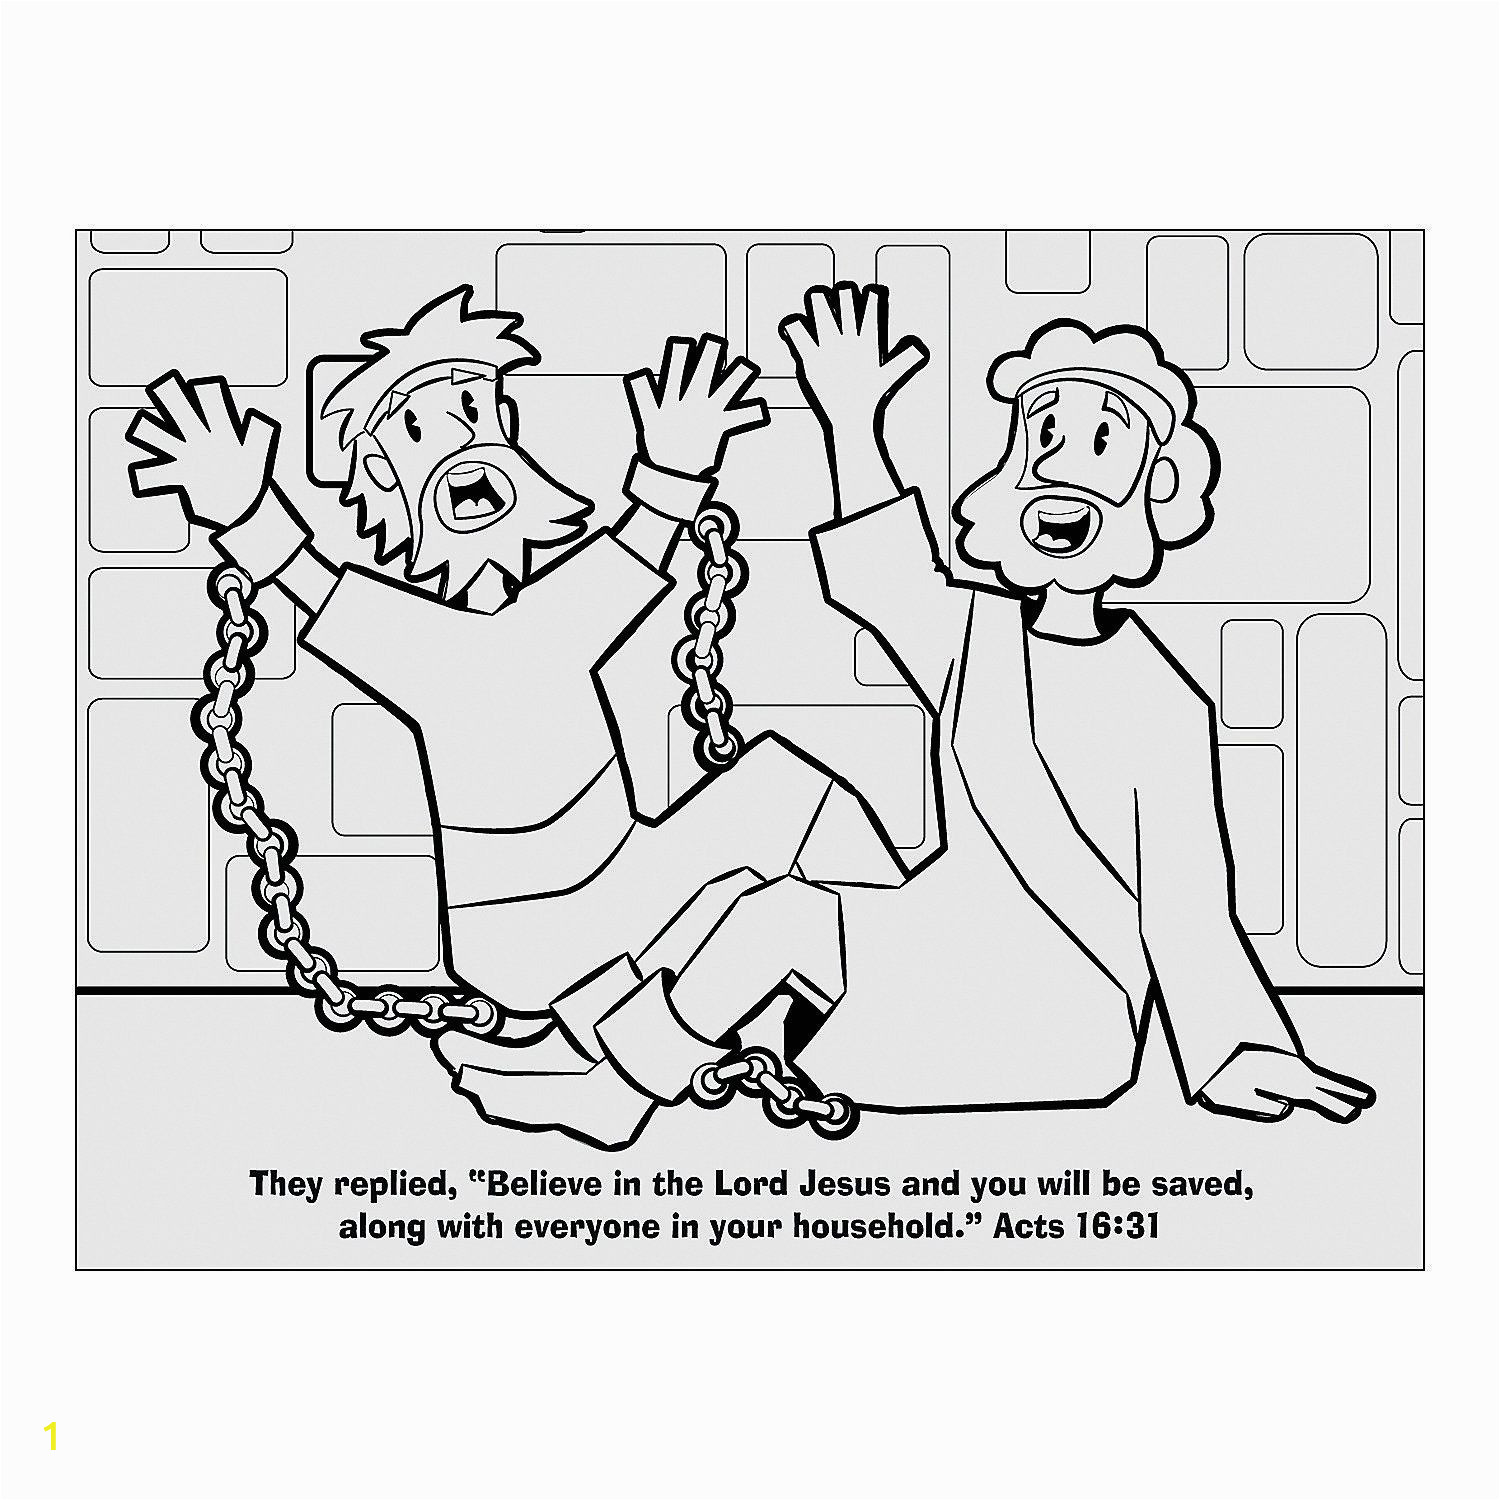 Paul and Silas In Jail Coloring Page Paul and Silas In Jail Free Coloring Page Coloring Home